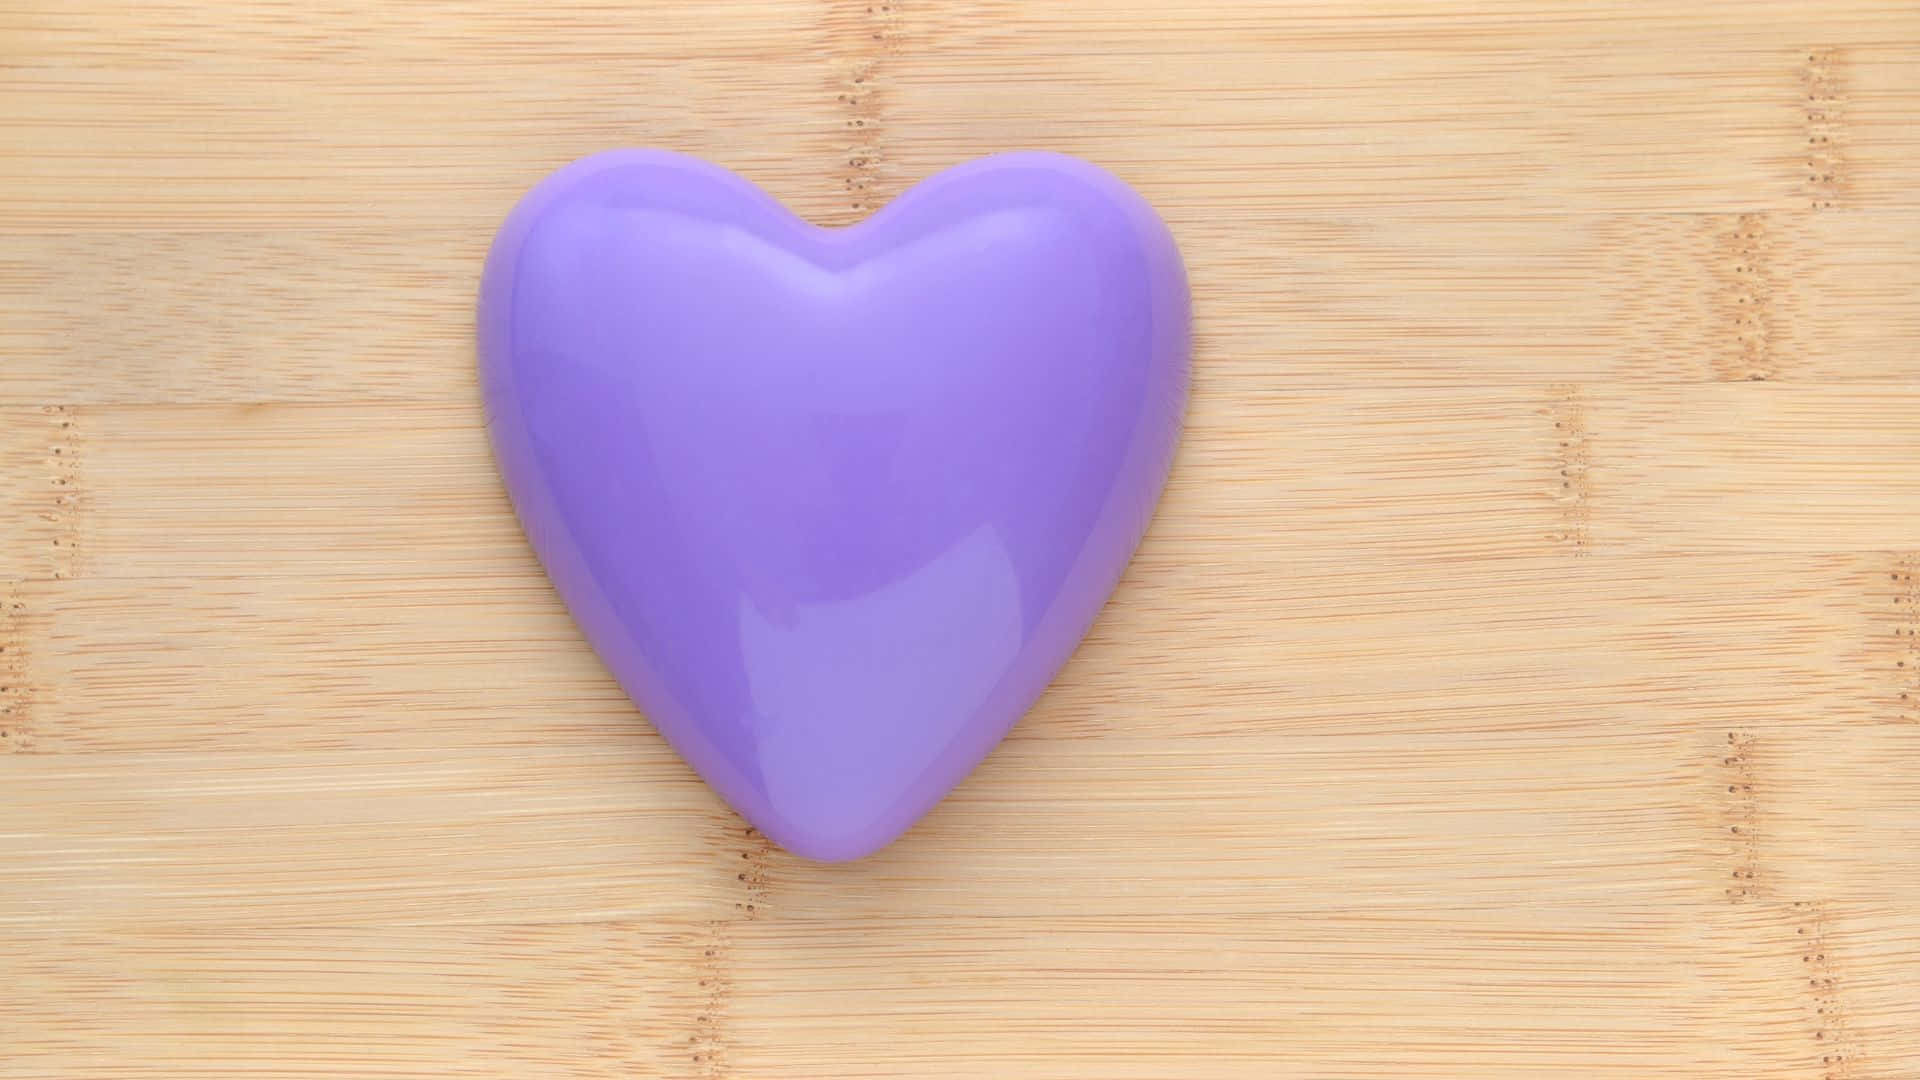 Celebrating Veterans with a Purple Heart